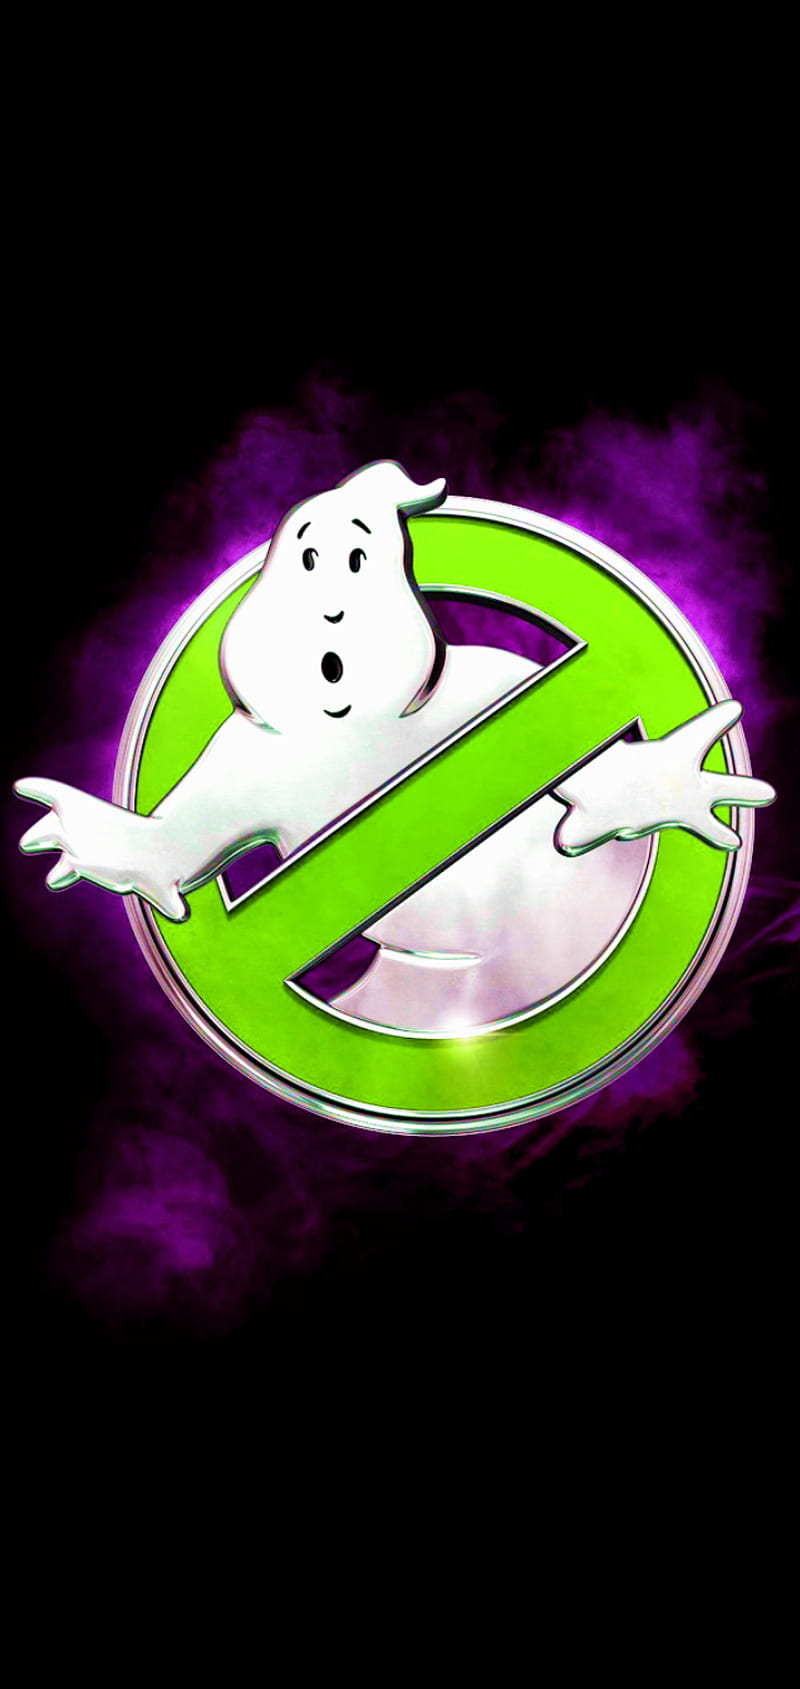 Ghostbusters phone wallpaper 1080P 2k 4k Full HD Wallpapers Backgrounds  Free Download  Wallpaper Crafter